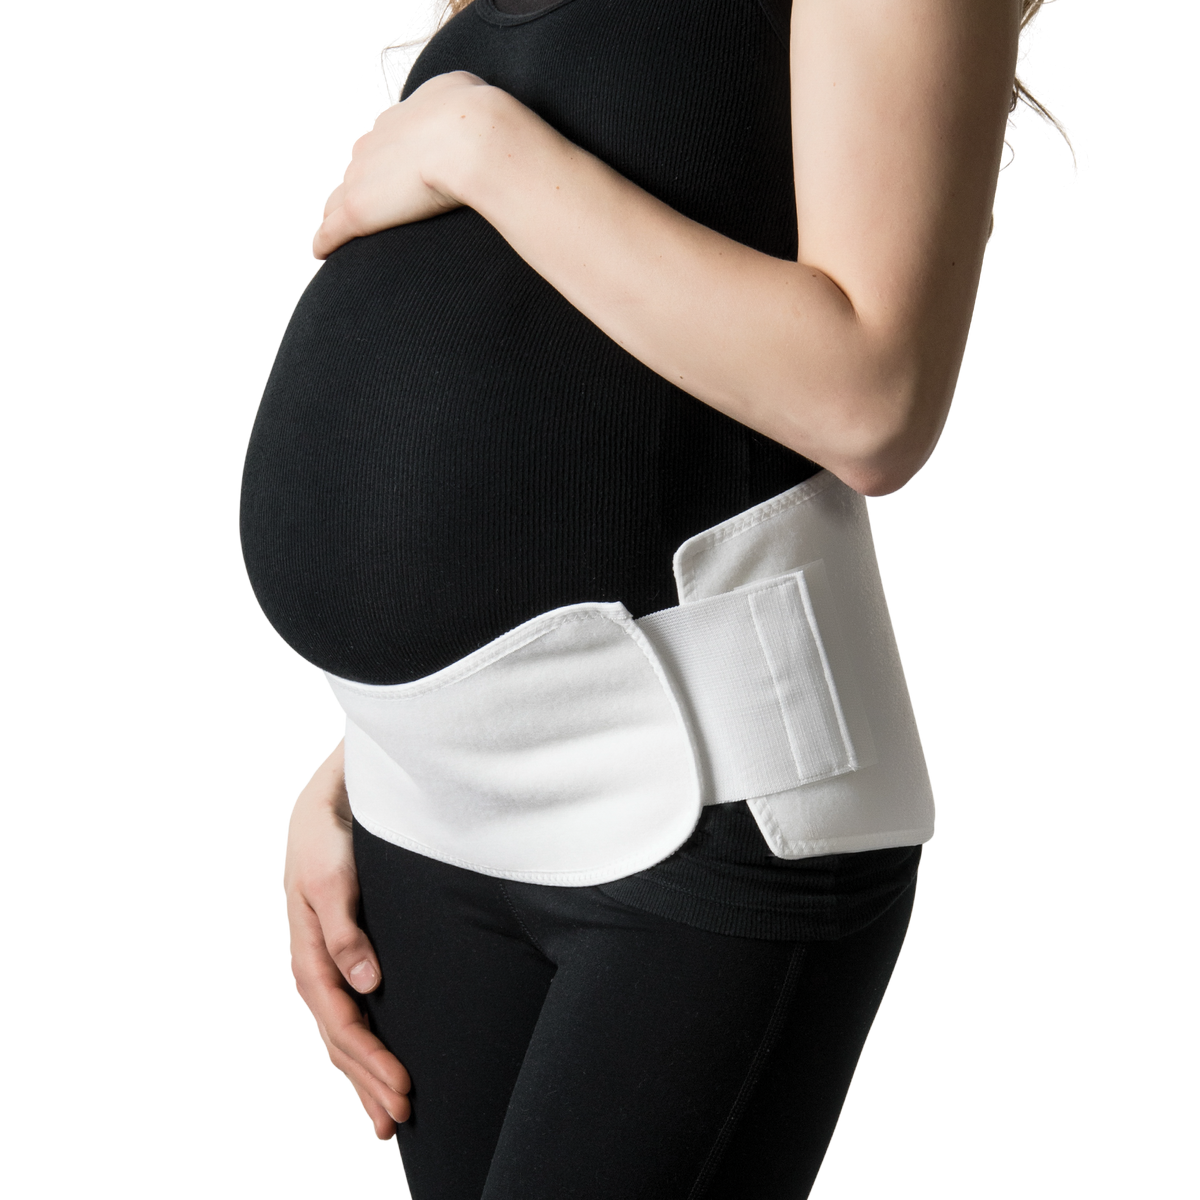 RelaxMaternity SILVER BELT - Maternity Girdle - body care products